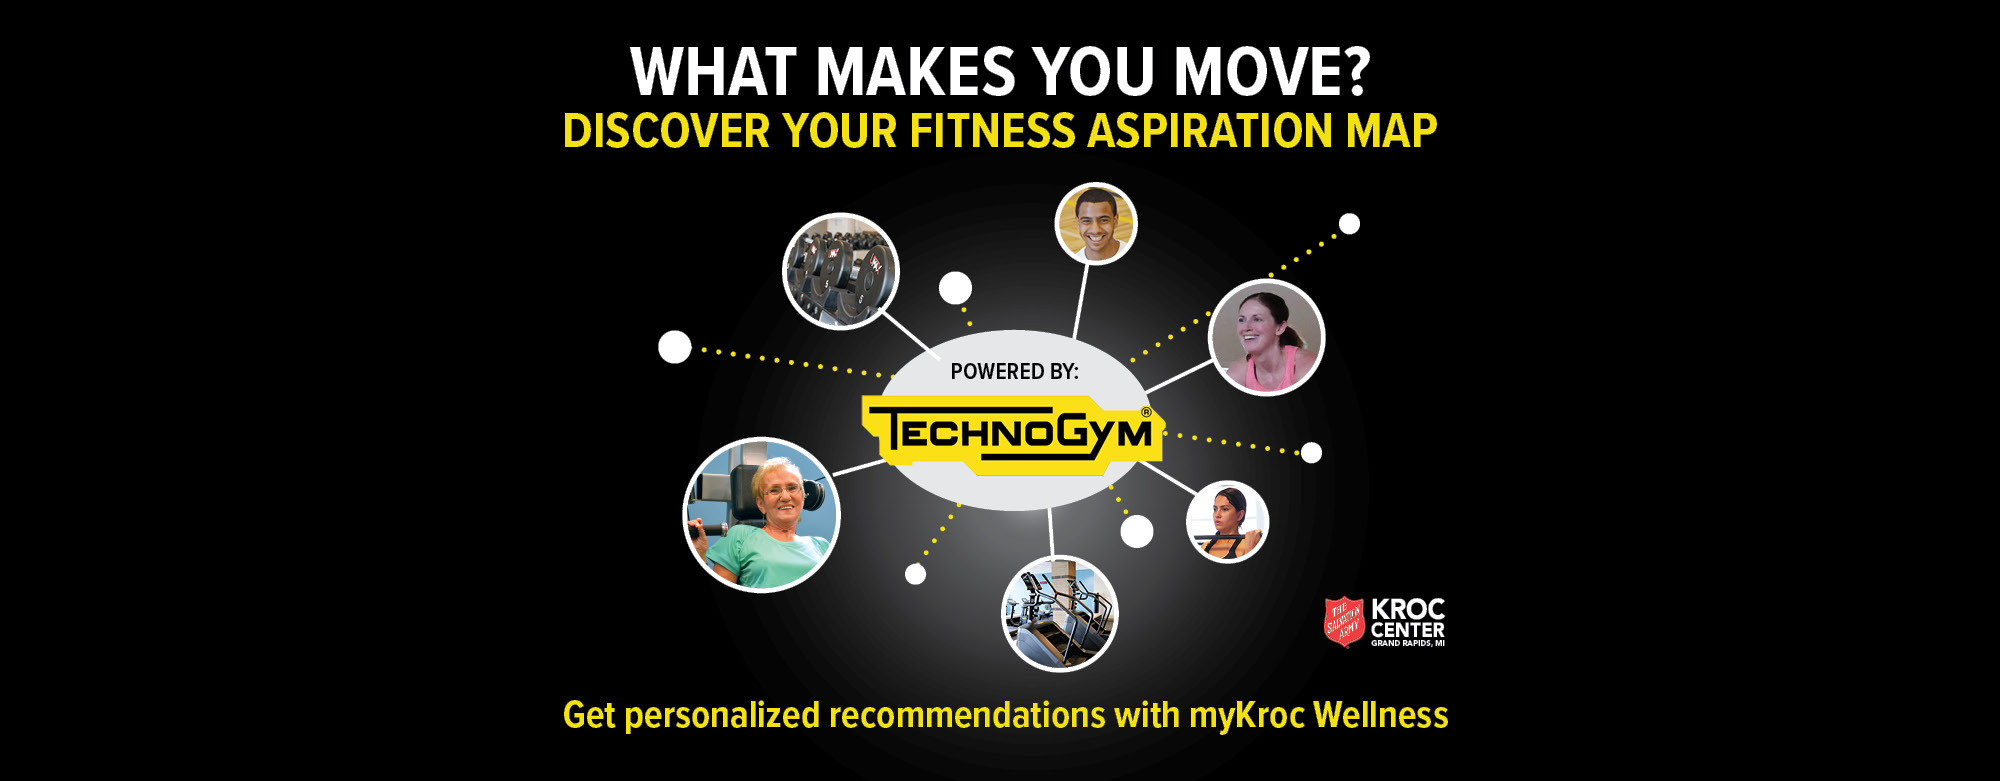 What makes you move? Discover your fitness aspiration map and get personalized recommendations with myKroc Wellness!